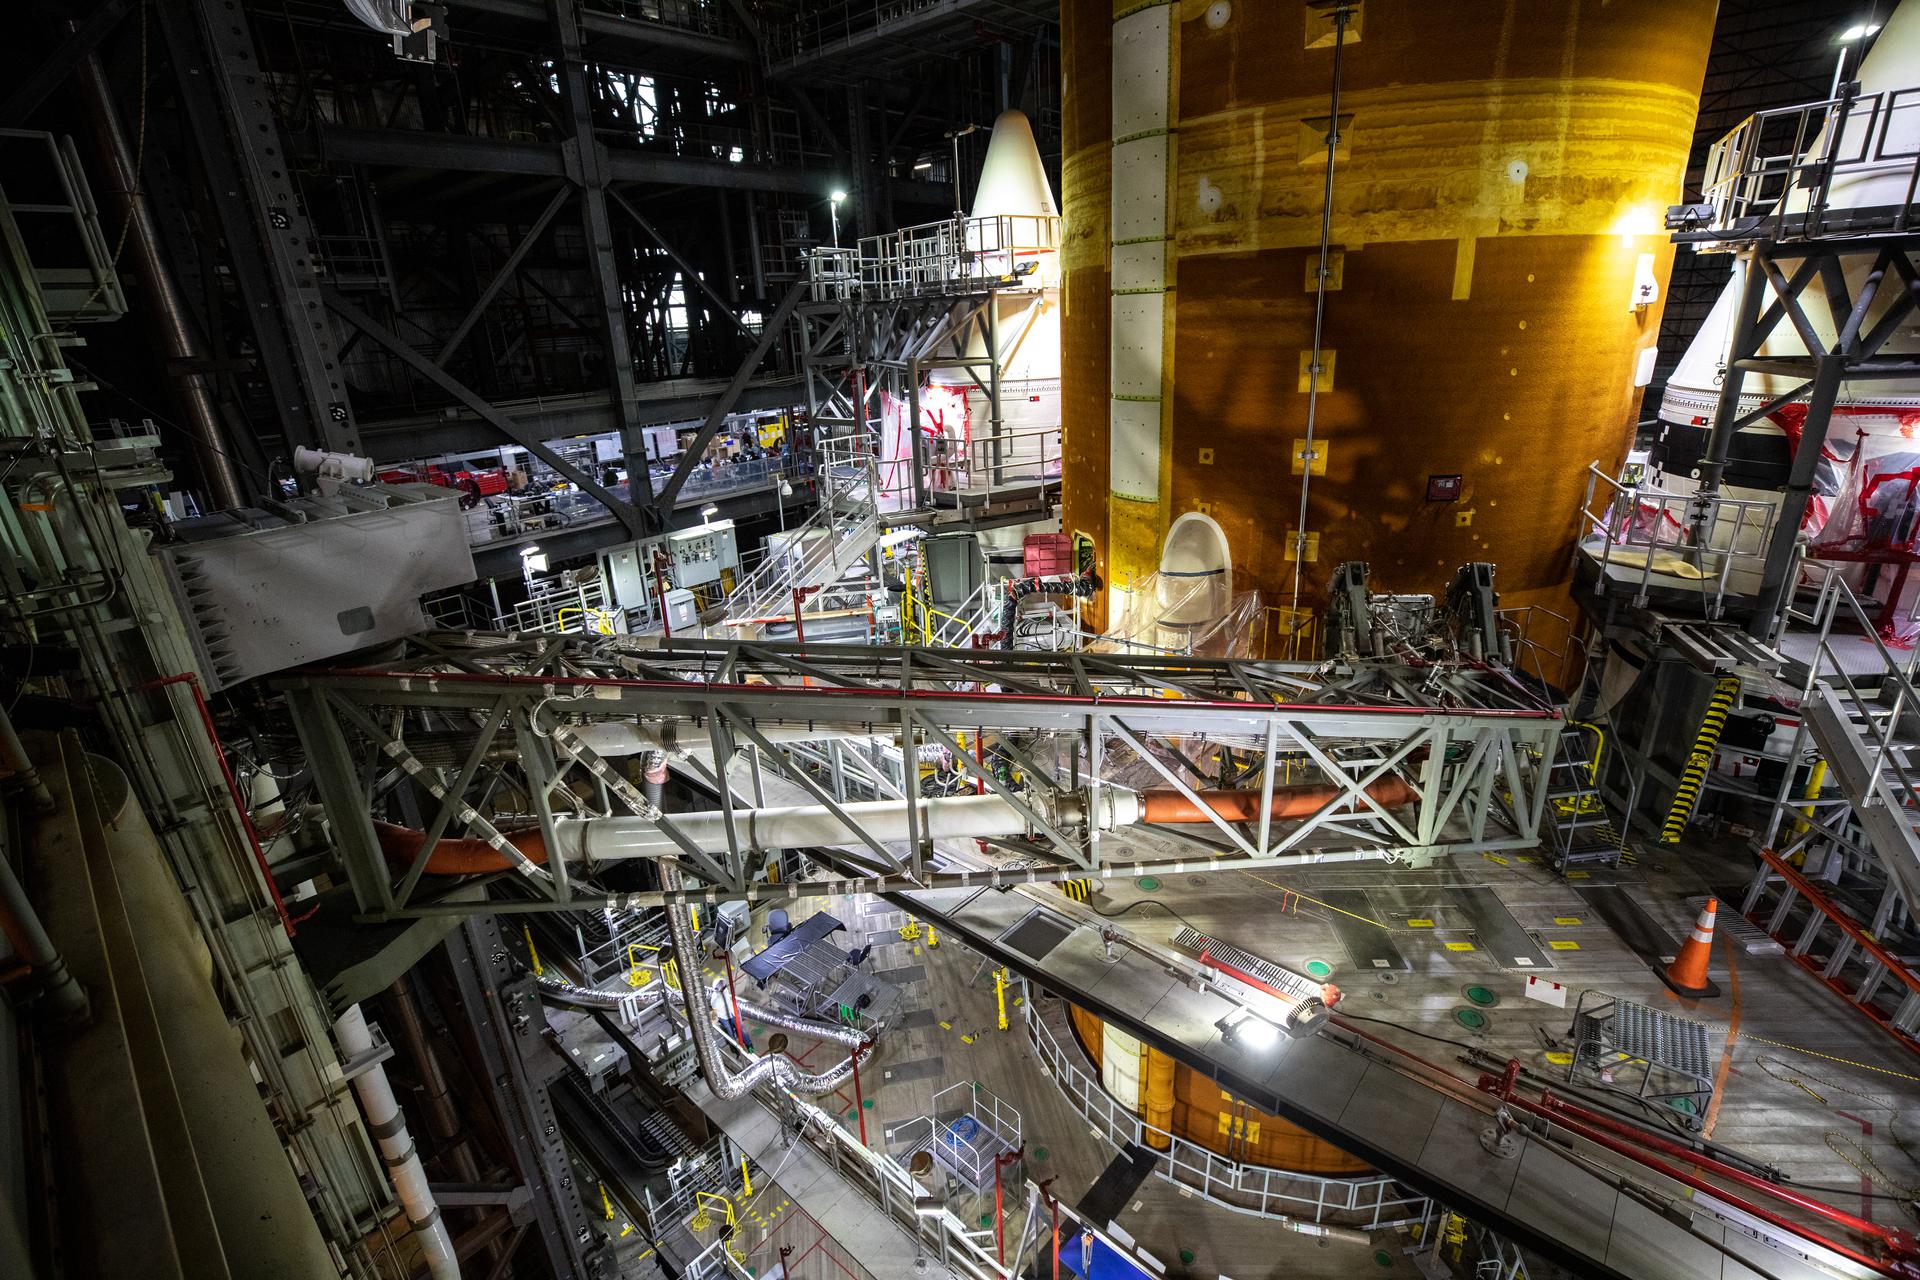 The core stage inter-tank umbilical is attached to the Space Launch System (SLS) core stage inside the Vehicle Assembly Building at NASA’s Kennedy Space Center in Florida on Aug. 12, 2021.